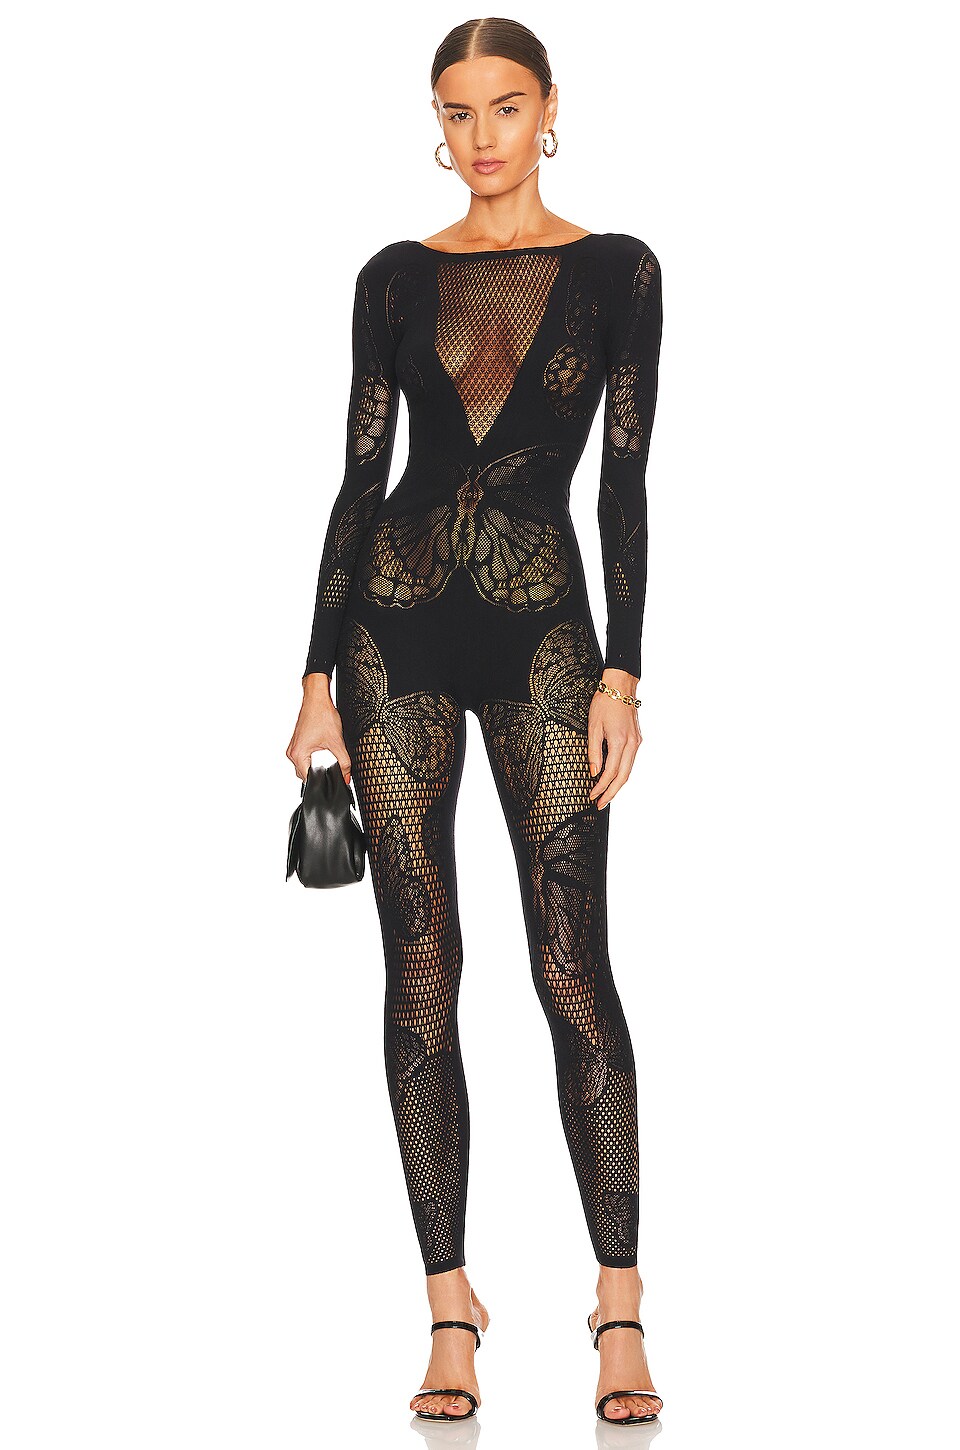 Butterfly Cut Out Bodysuit in Black. Revolve Women Clothing Tops Bodies 